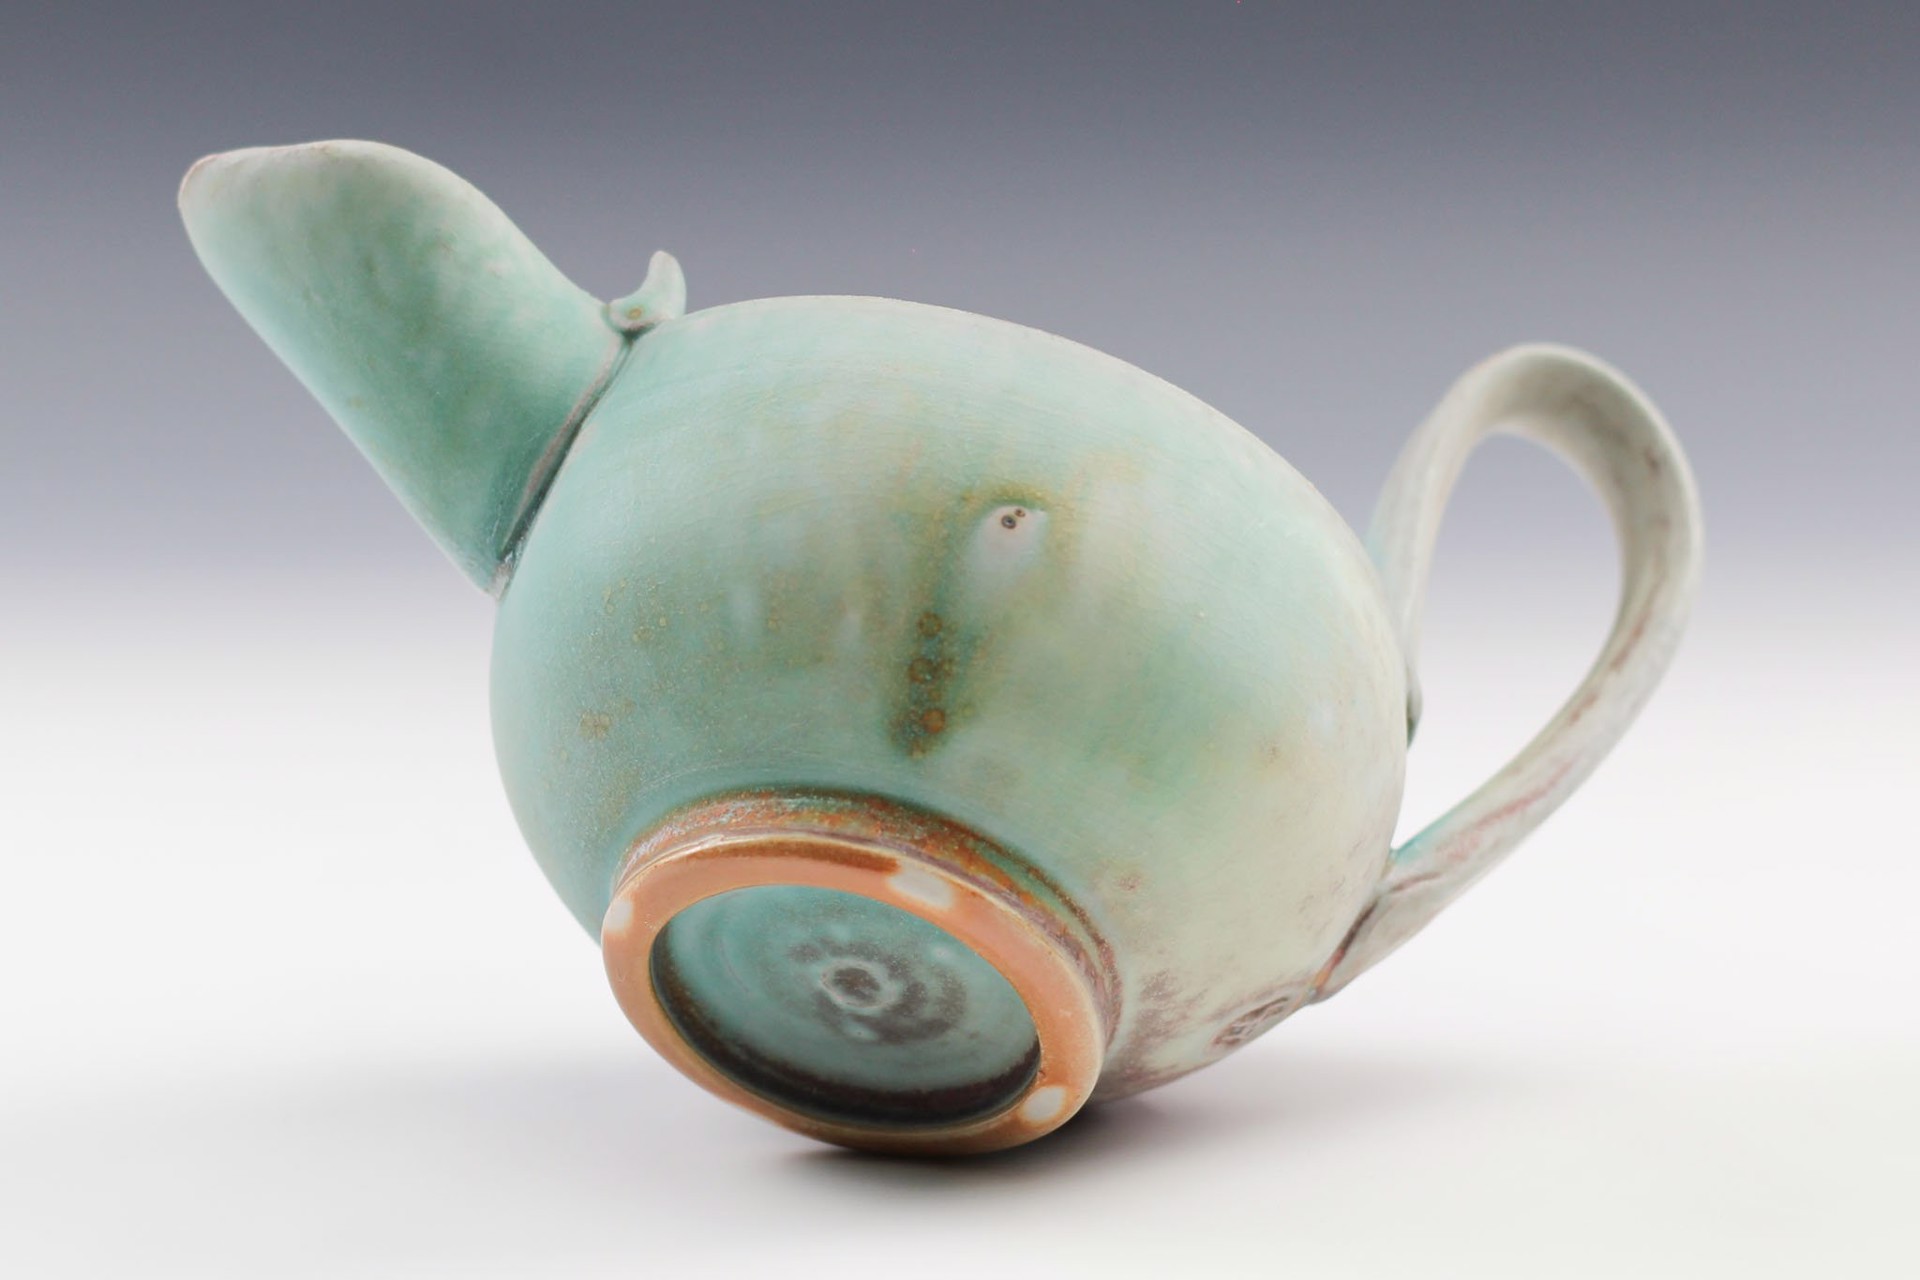 Gravy Boat by Karl Borgeson